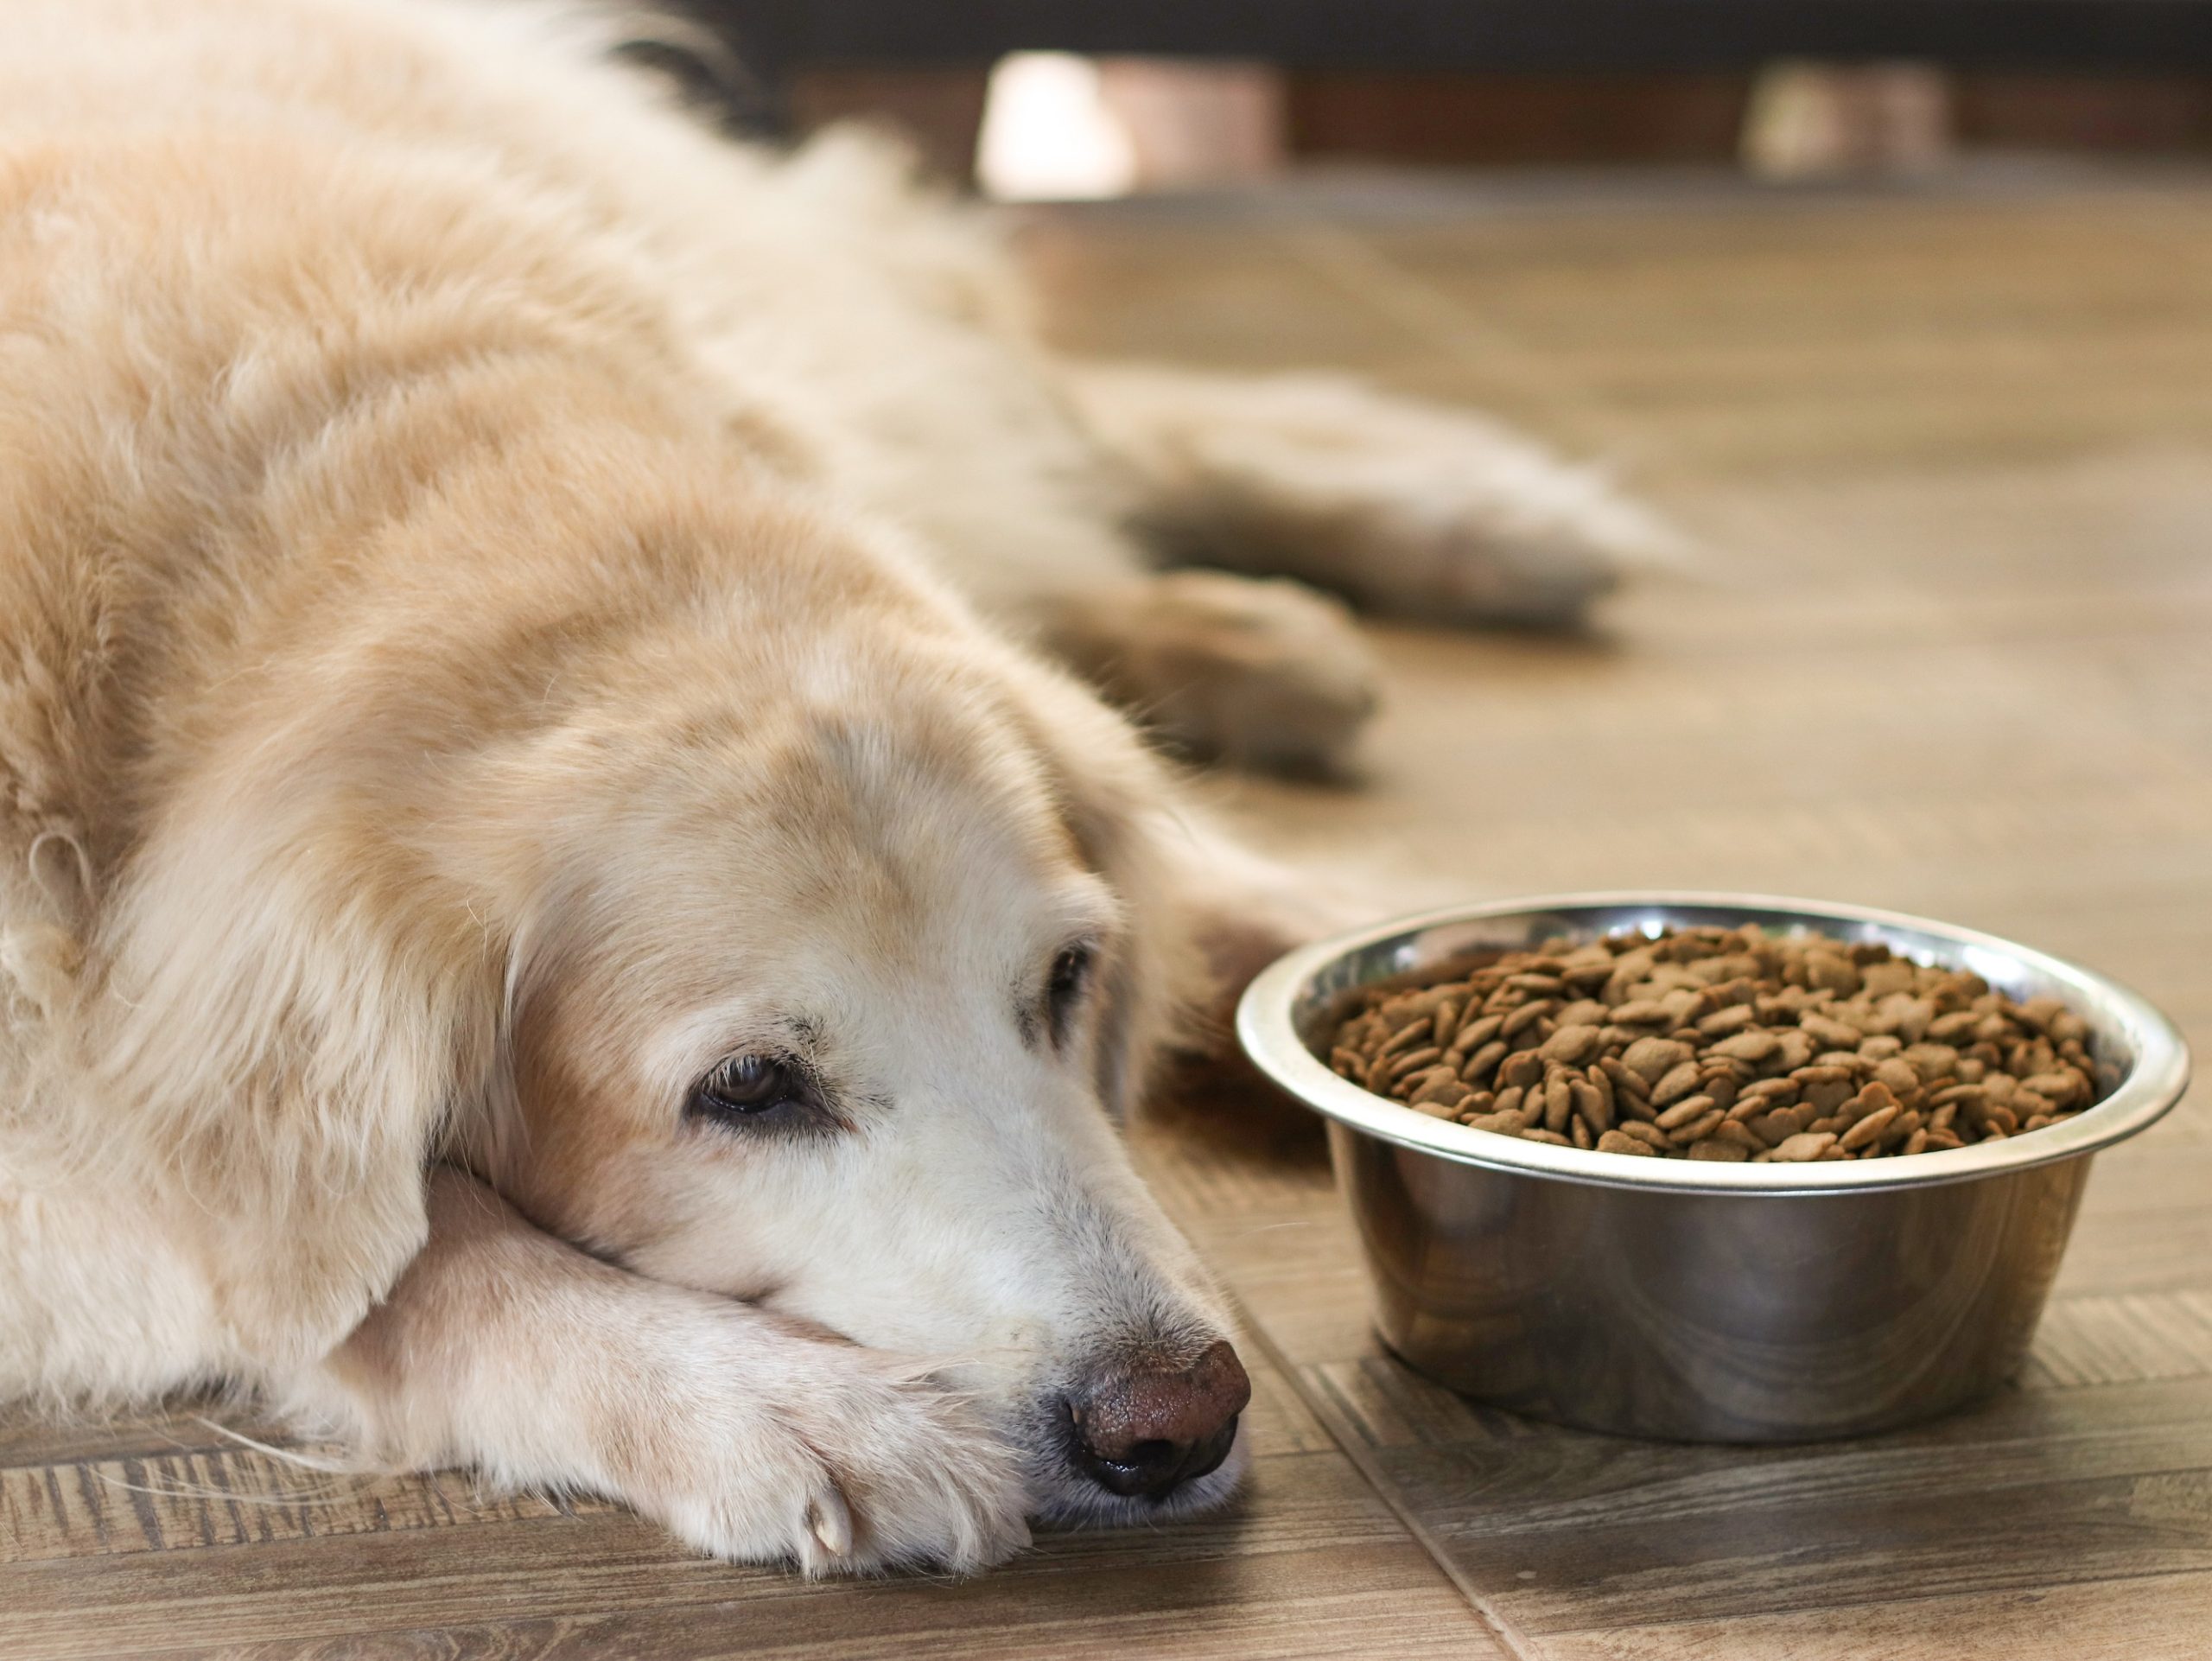 Dog lying next to food not eating